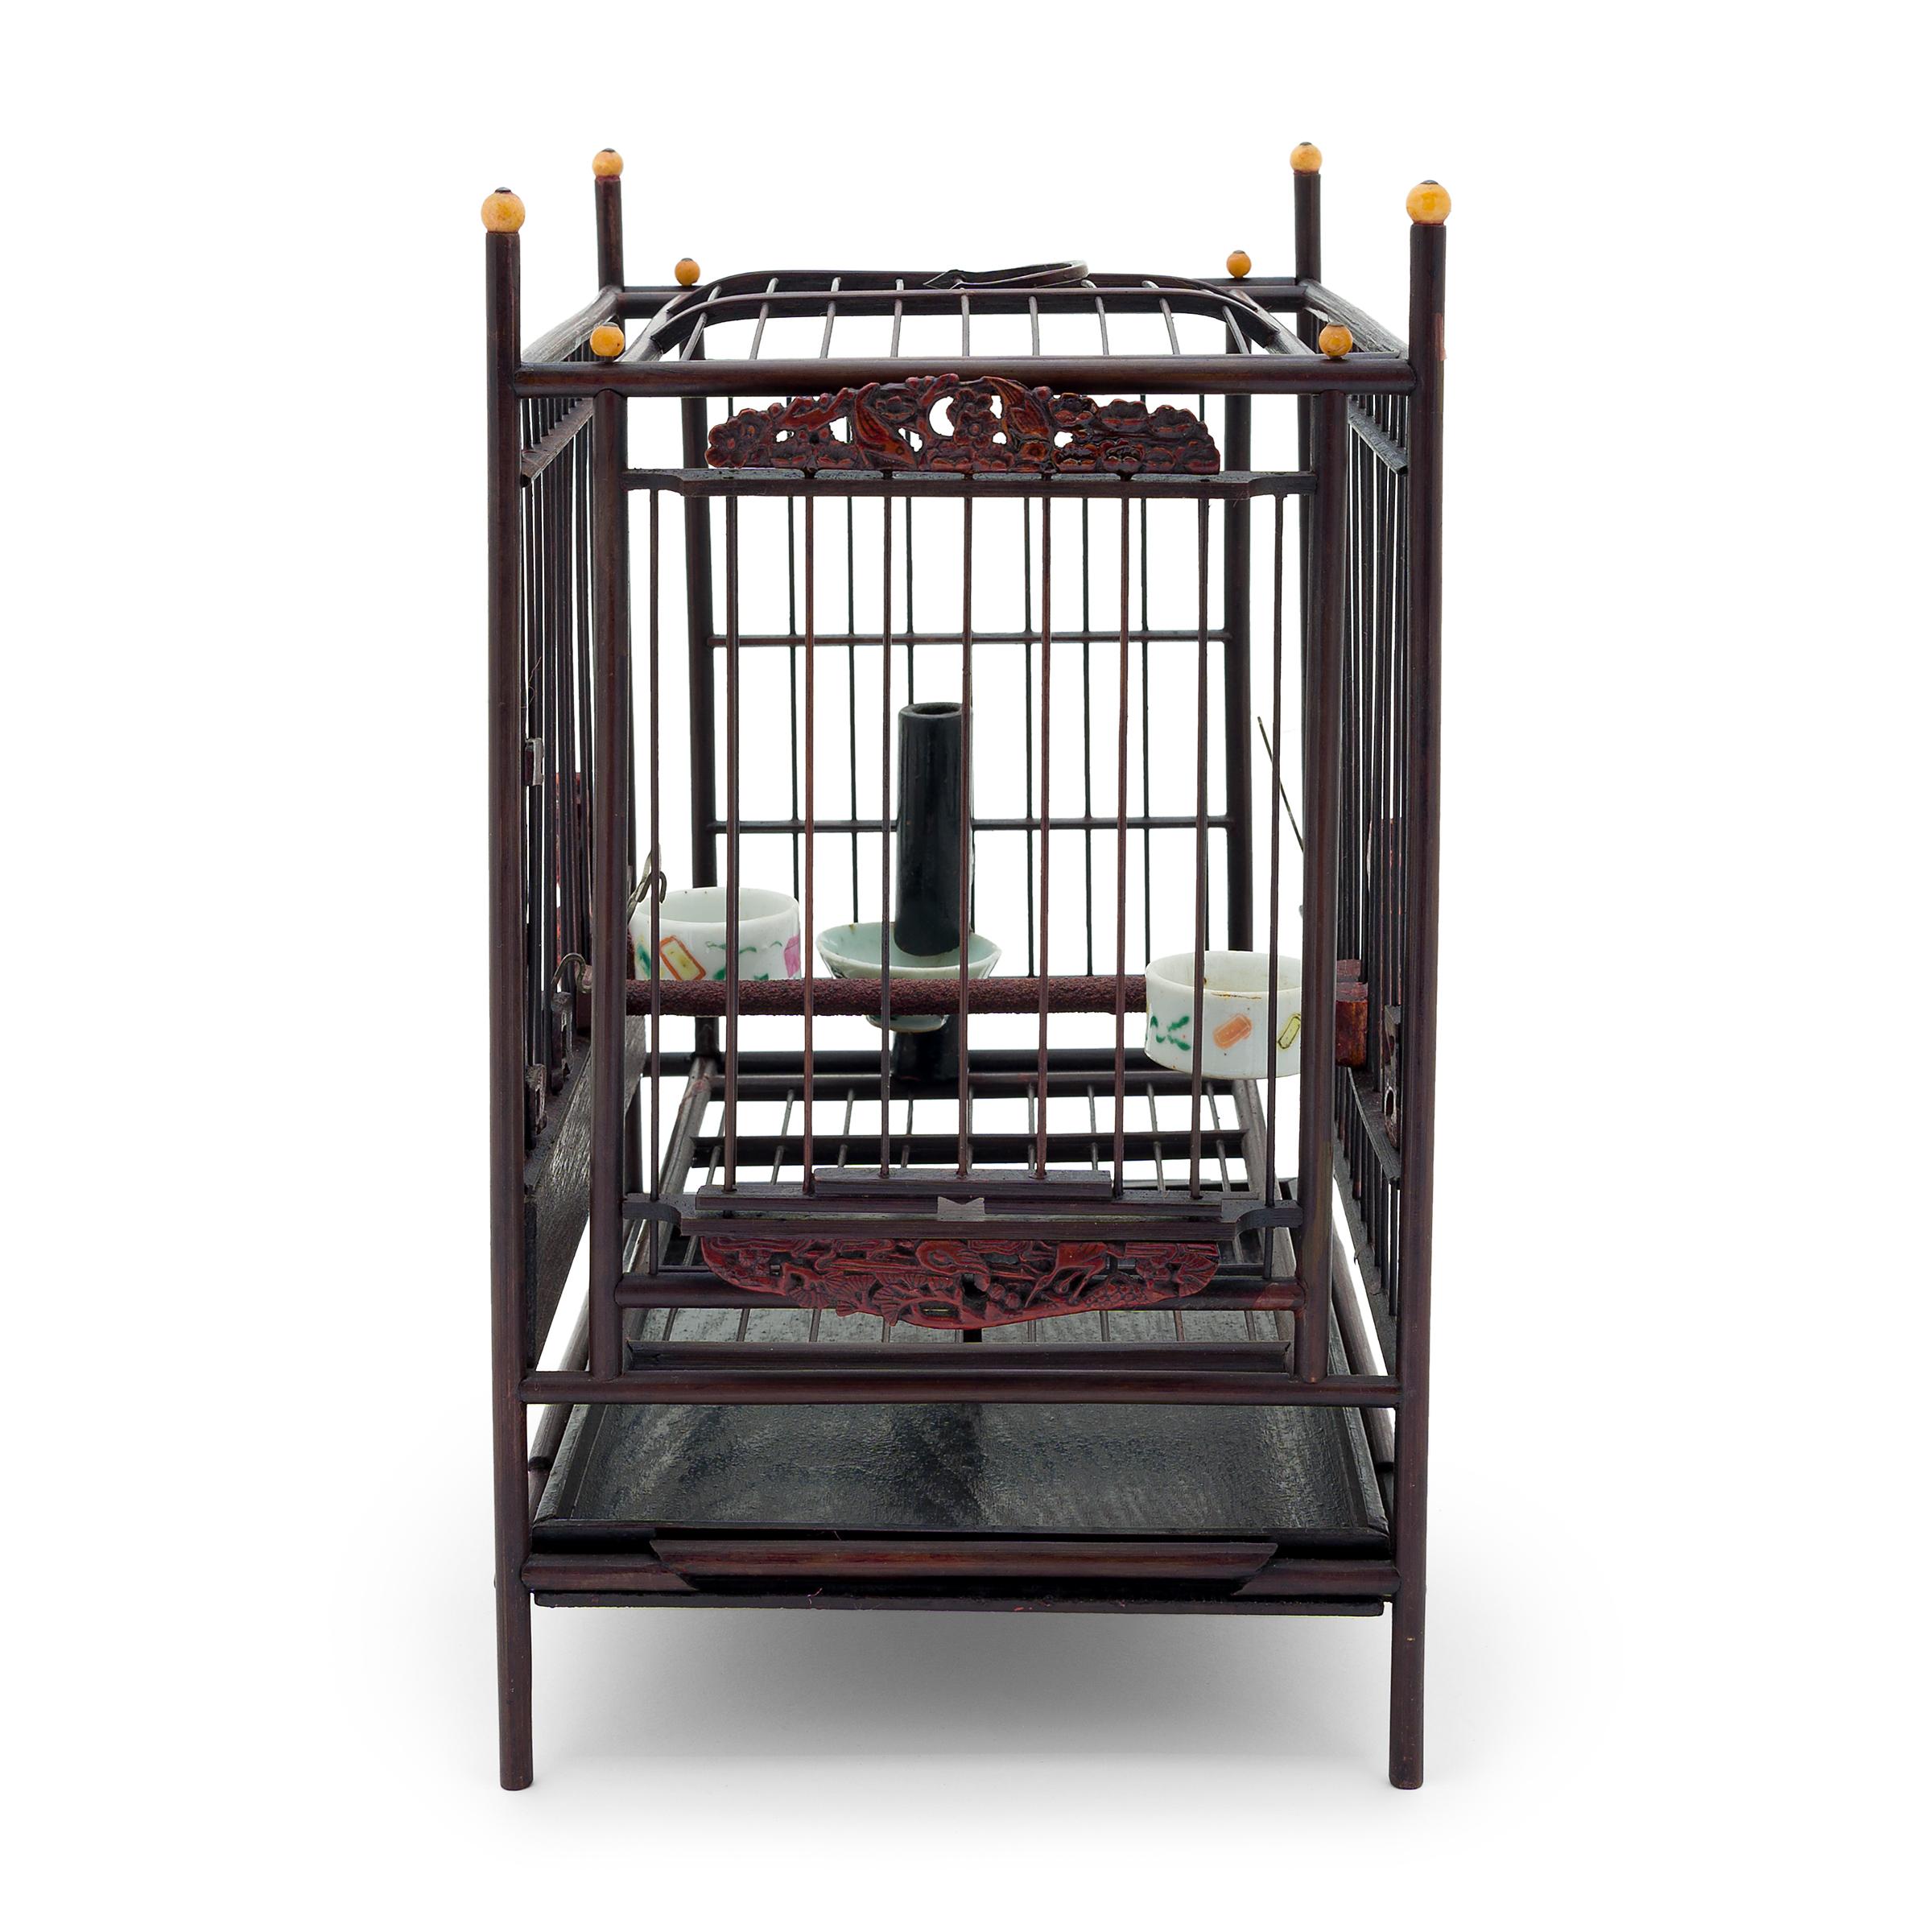 Qing Chinese Birdcage with Traveling Case, c. 1900